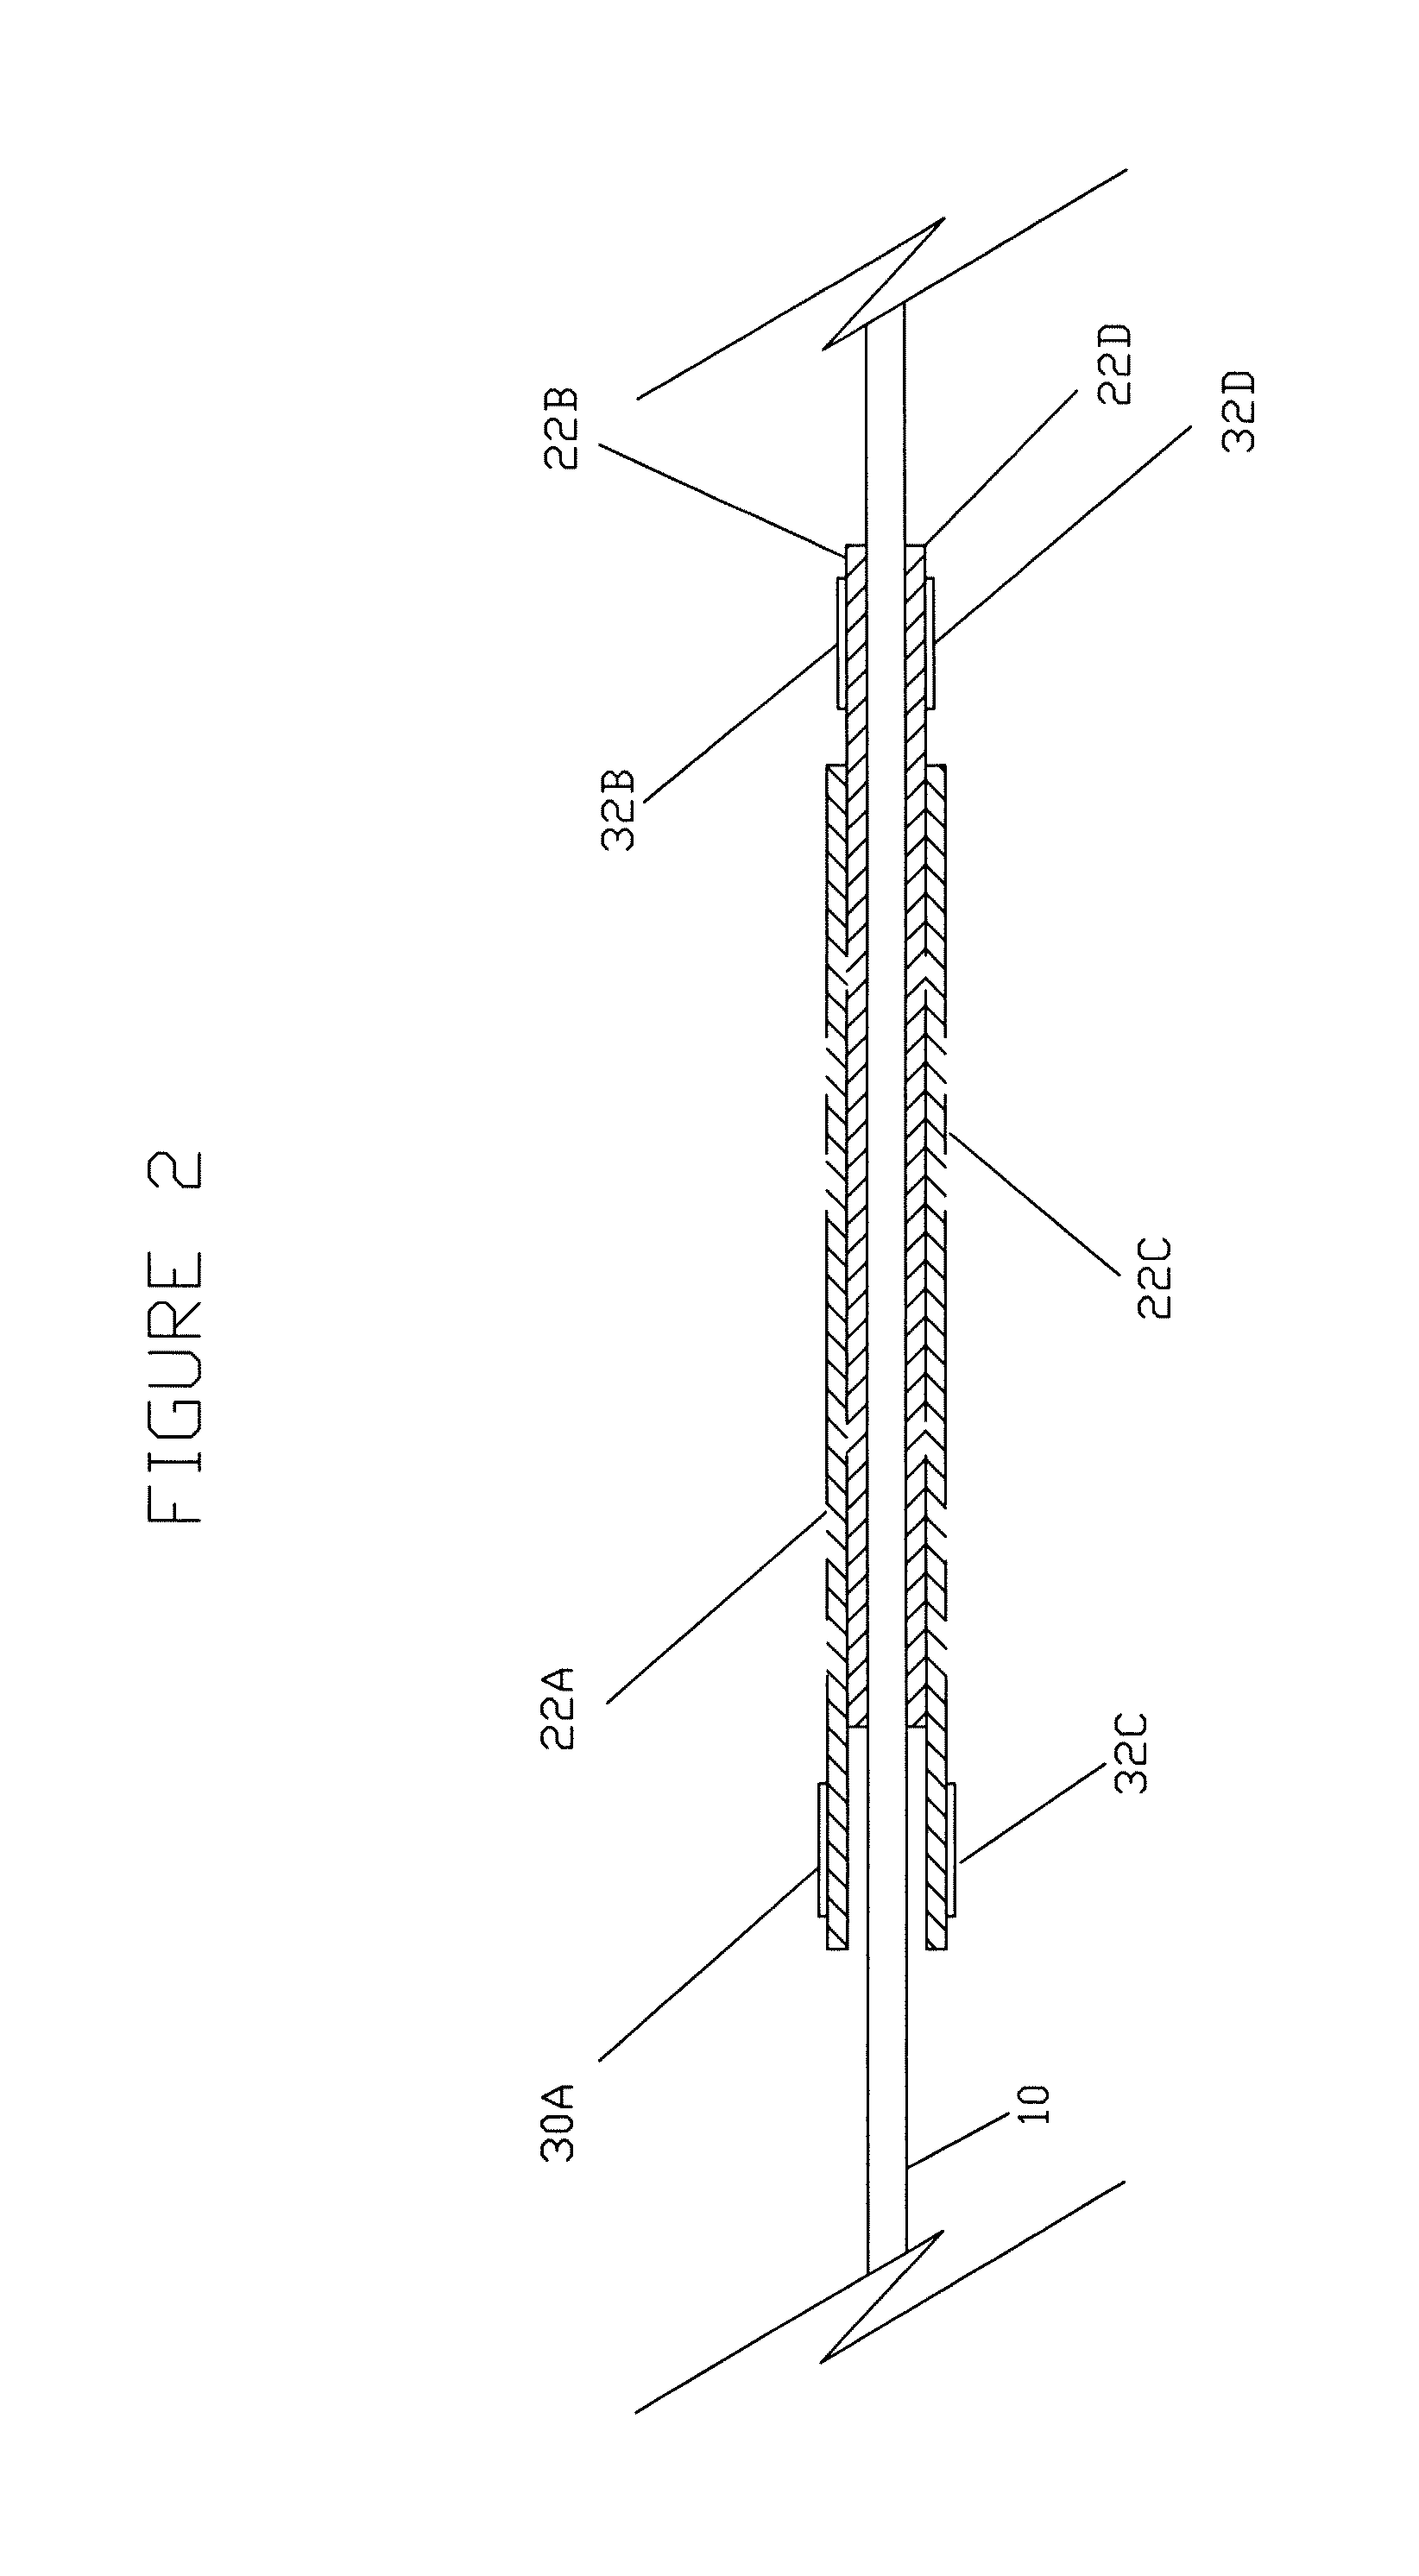 Surgical device employing a cantilevered beam dissector